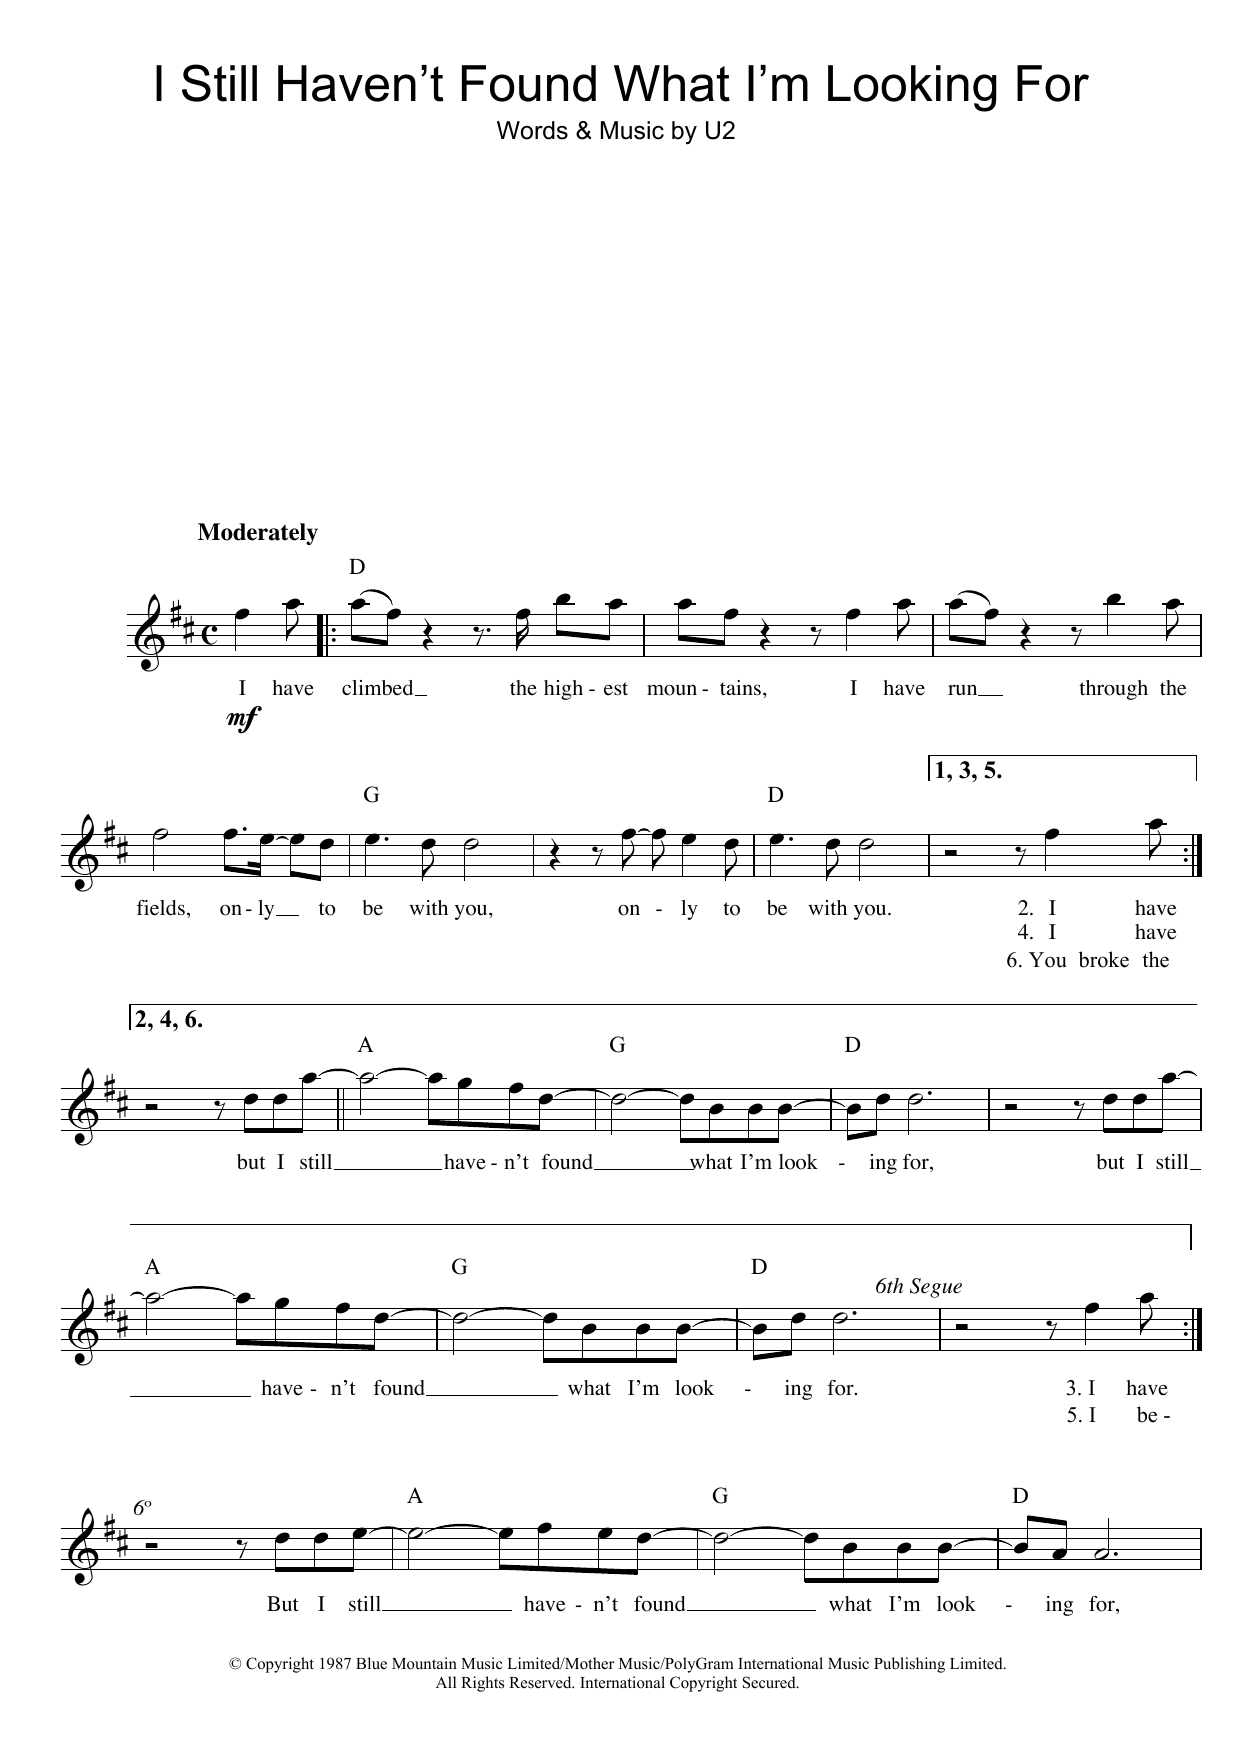 U2 I Still Haven't Found What I'm Looking For sheet music notes printable PDF score